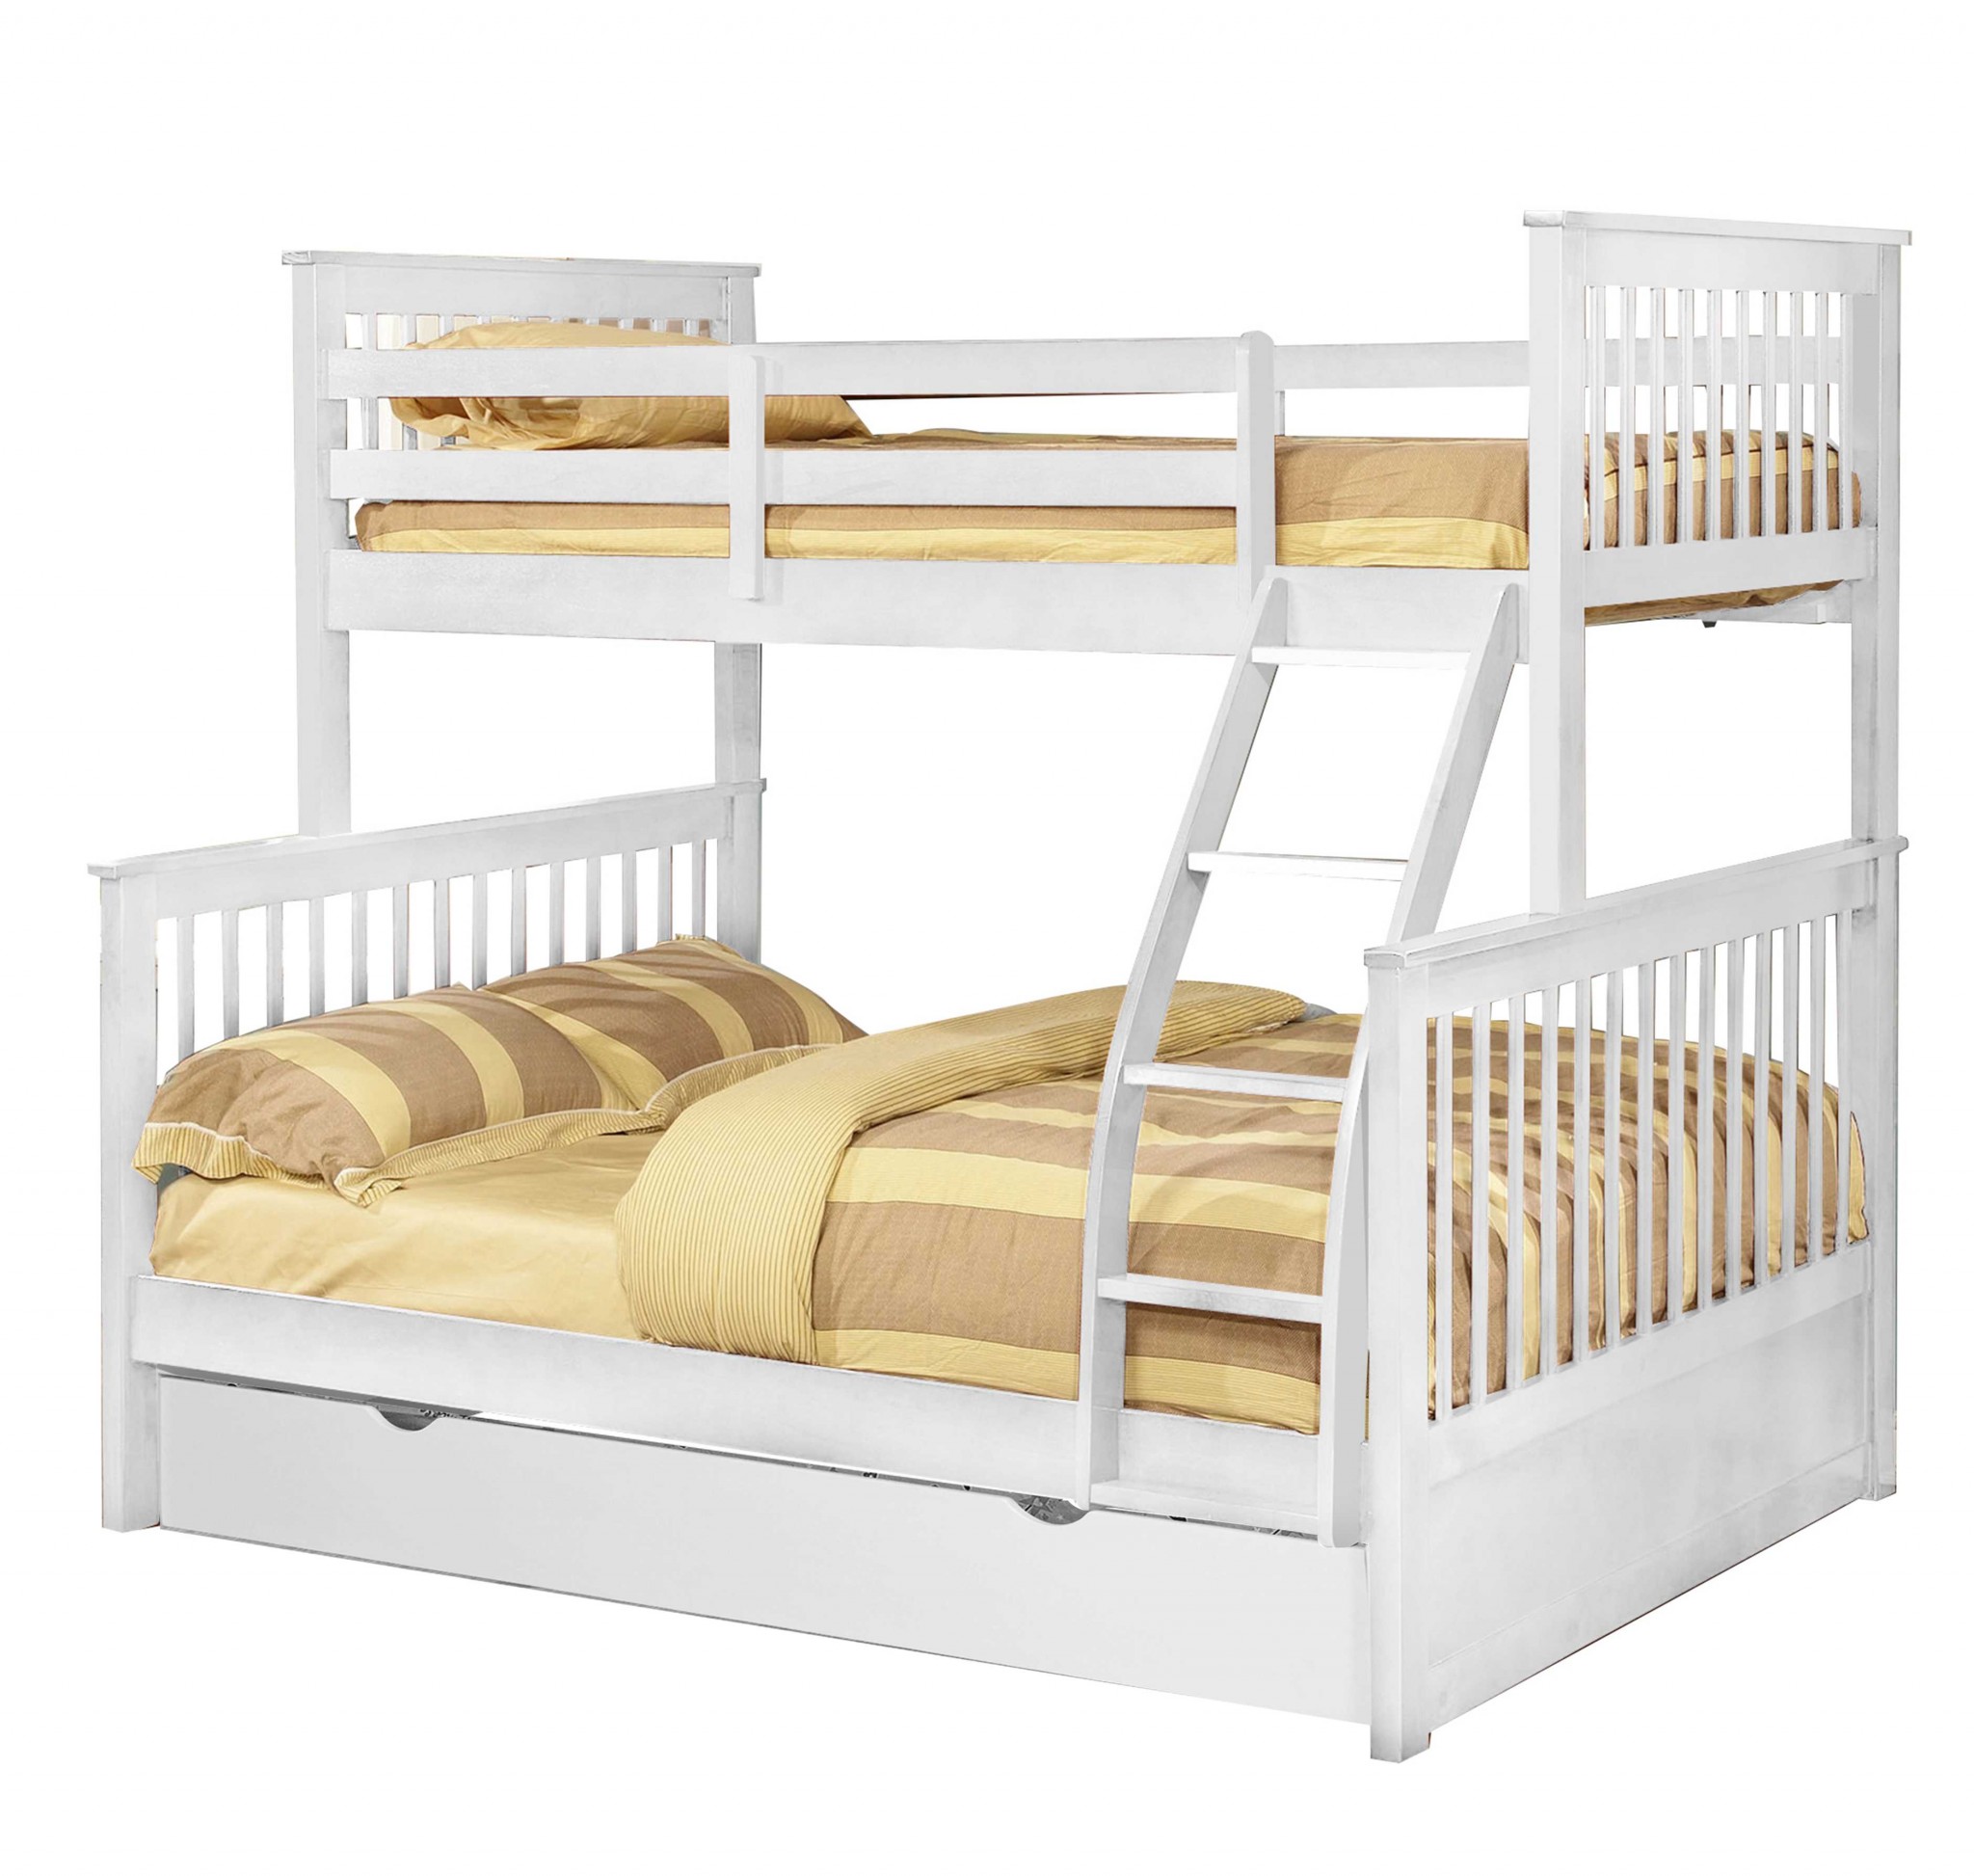 80.5" X 41.5-57.5" X 70.25" White Manufactured Wood and Solid Wood Twin or Full Bunk Bed with Matching Trundle